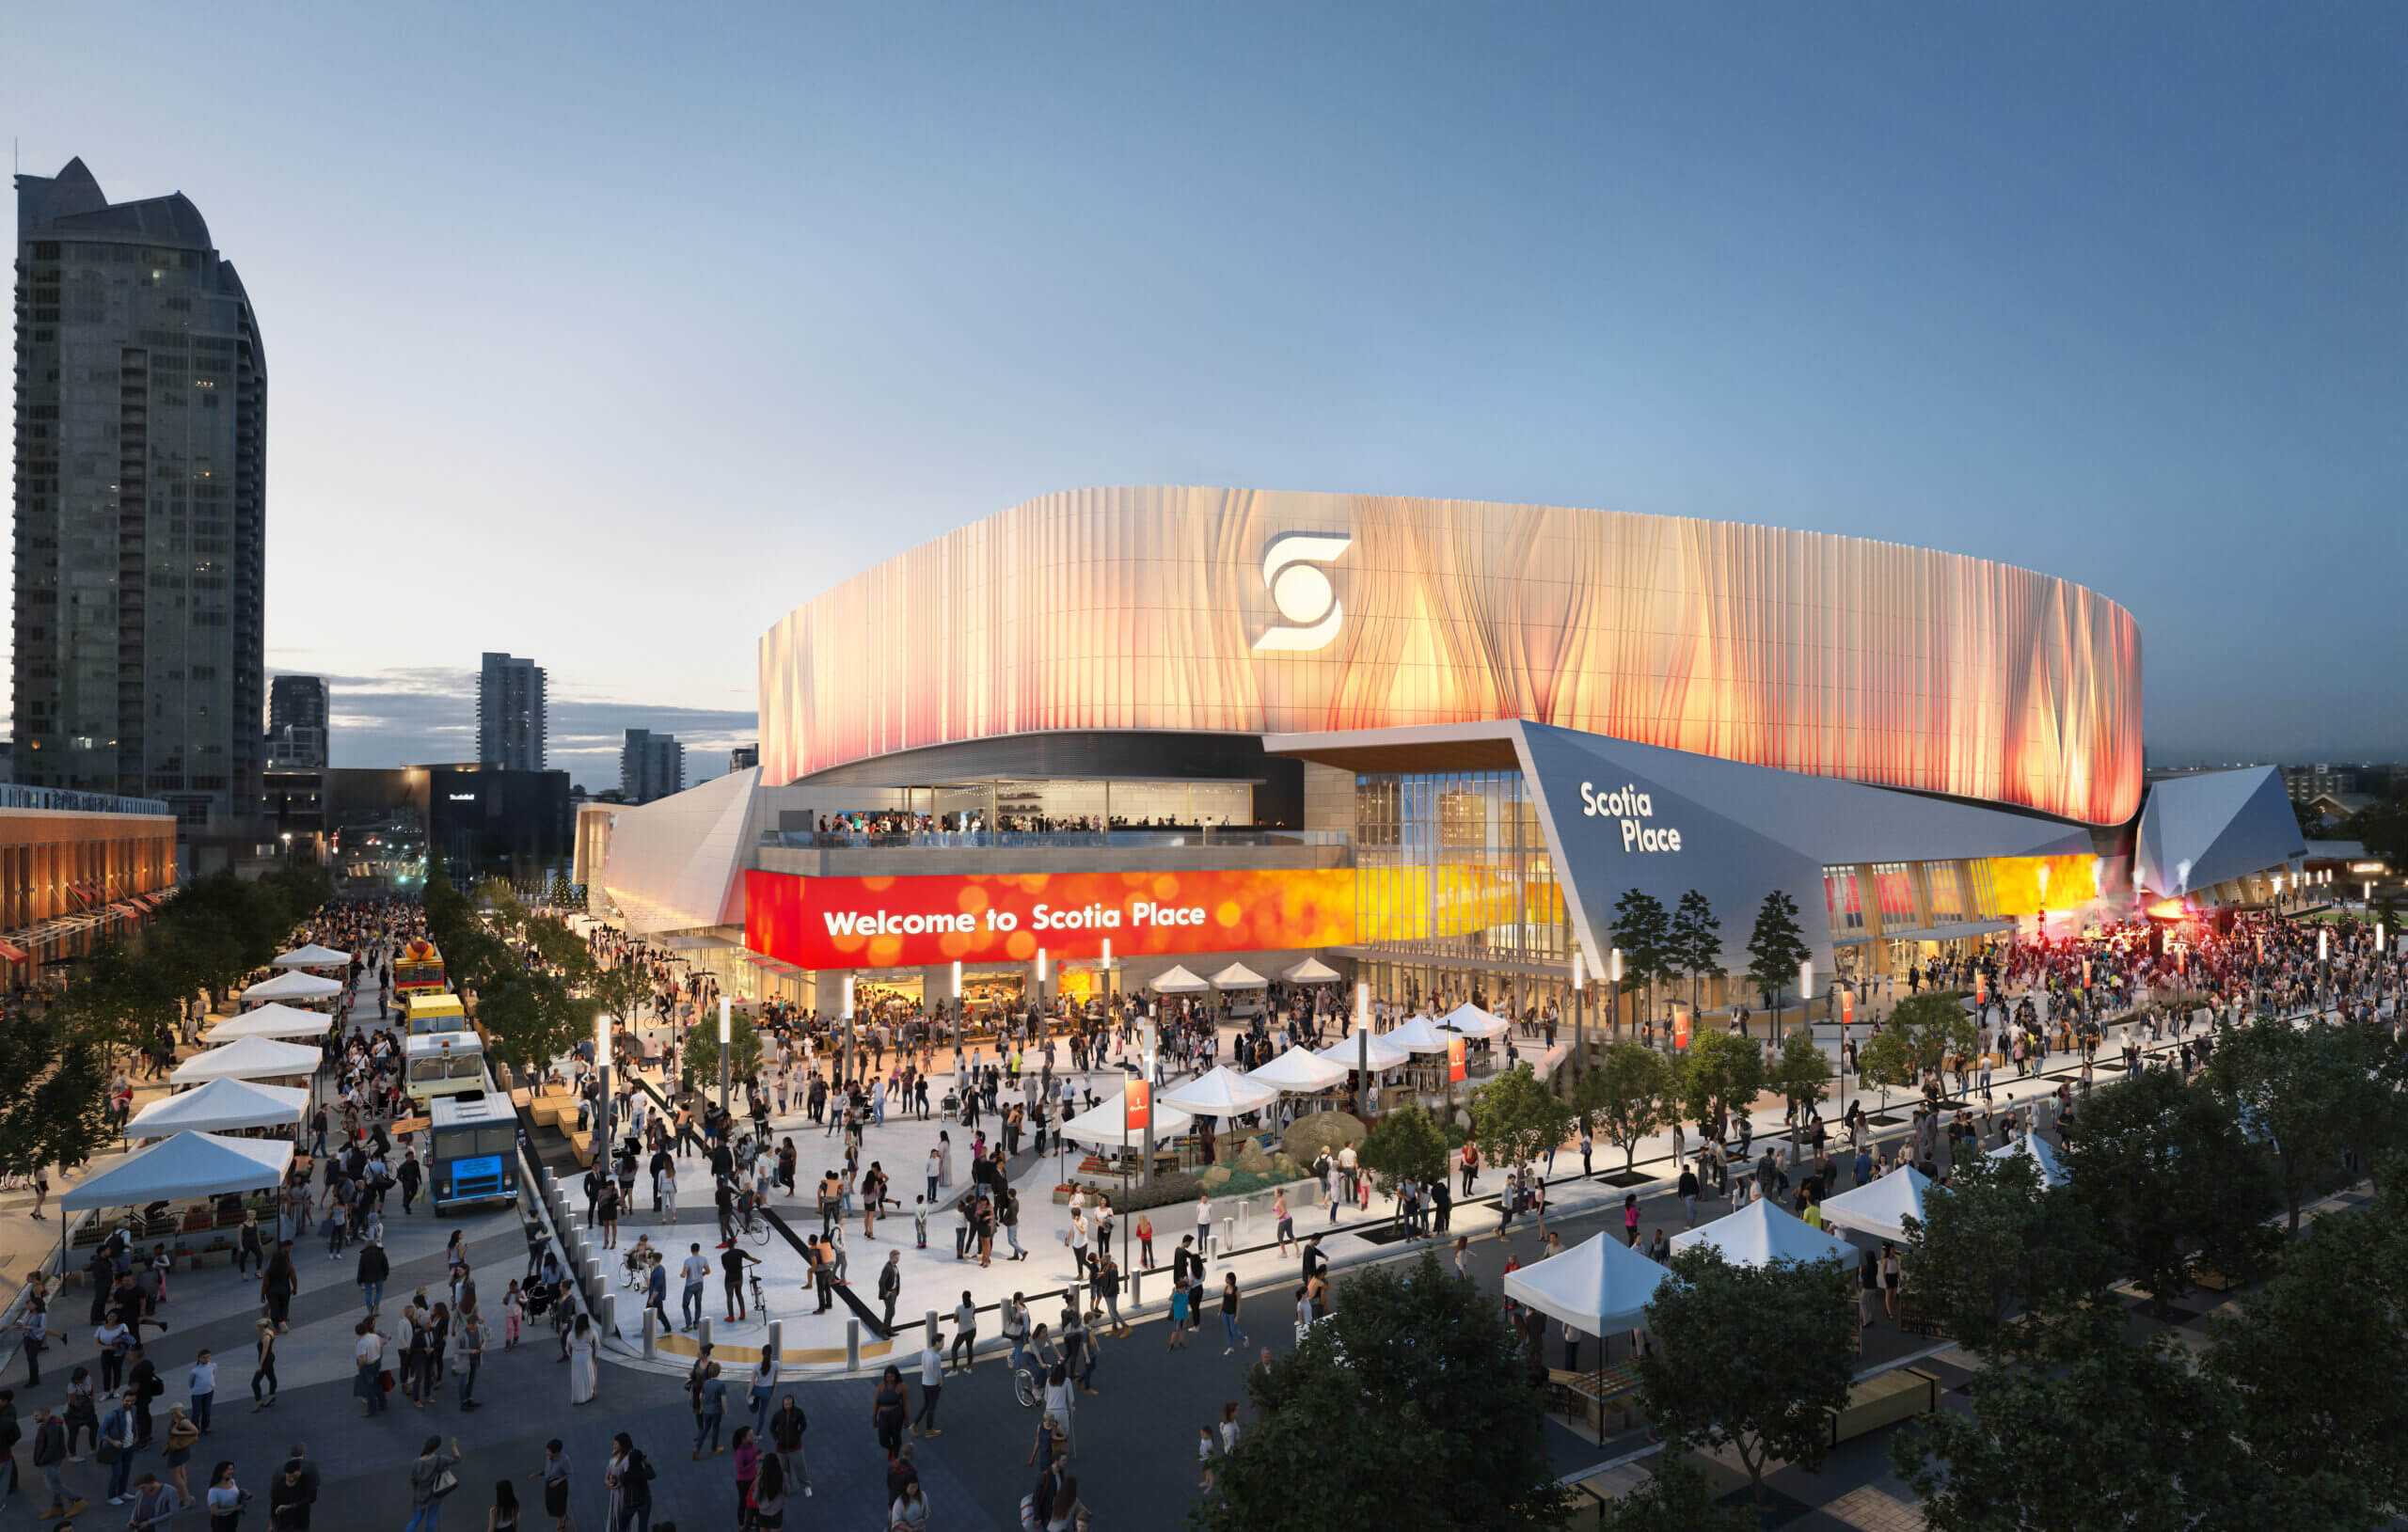 Ground breaks on Flames' new arena, expected to be completed in 2027